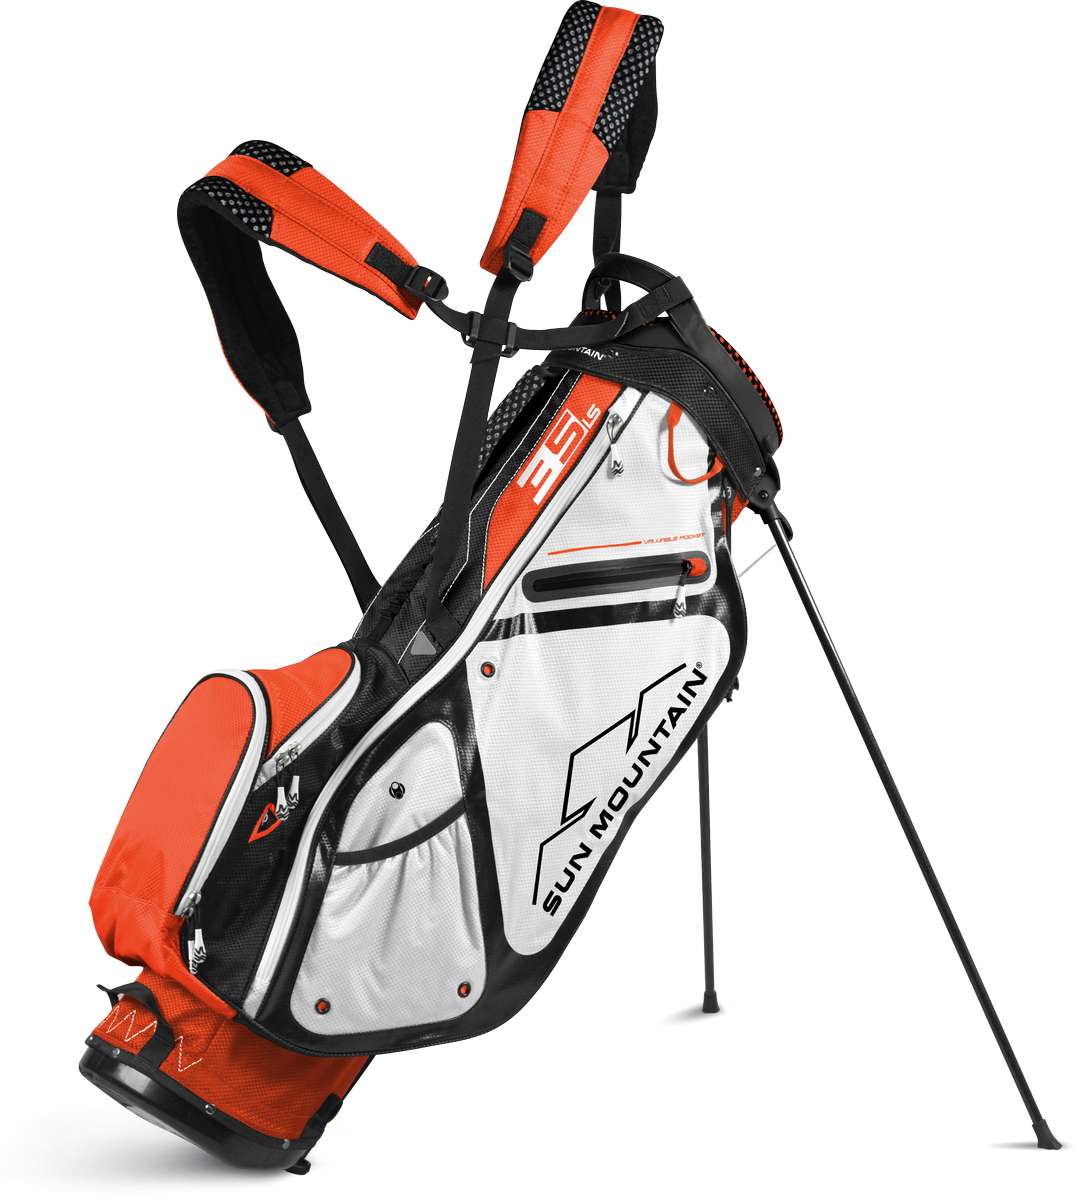 Sun Mountain 3.5 LS Golf Bag Review By David Theoret